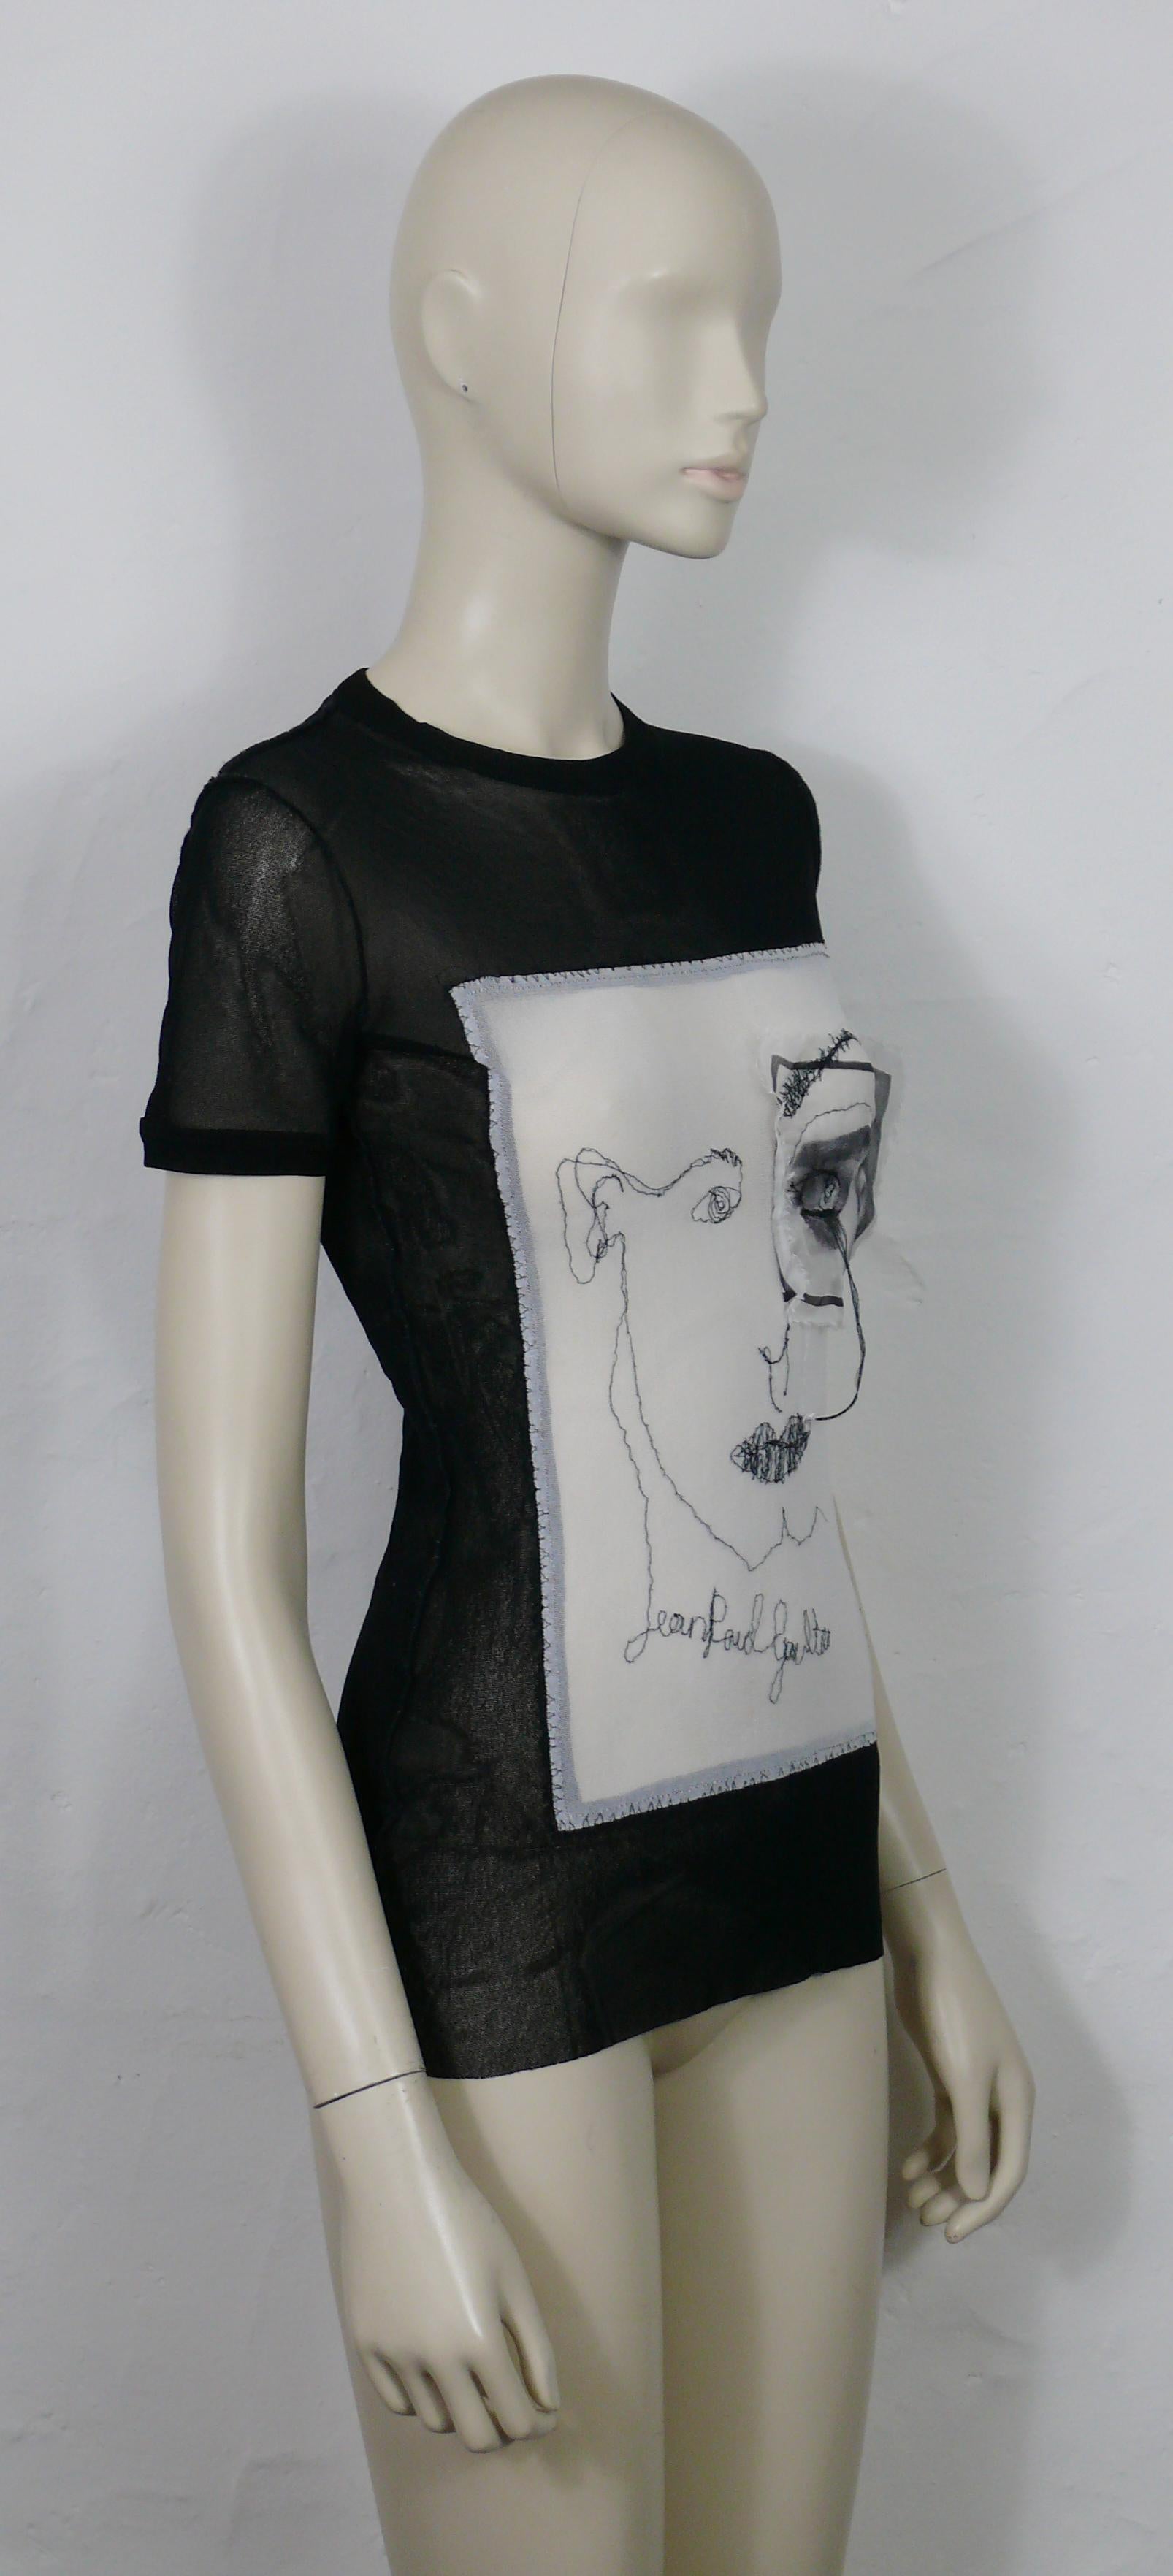 JEAN PAUL GAULTIER vintage black sheer mesh short sleeve top with embroidered portrait and eye applique.

This stretchy mesh nylon top is embroidered with black JEAN PAUL GAULTIER cursive signature.

Label reads JEAN PAUL GAULTIER Maille Femme.
Made